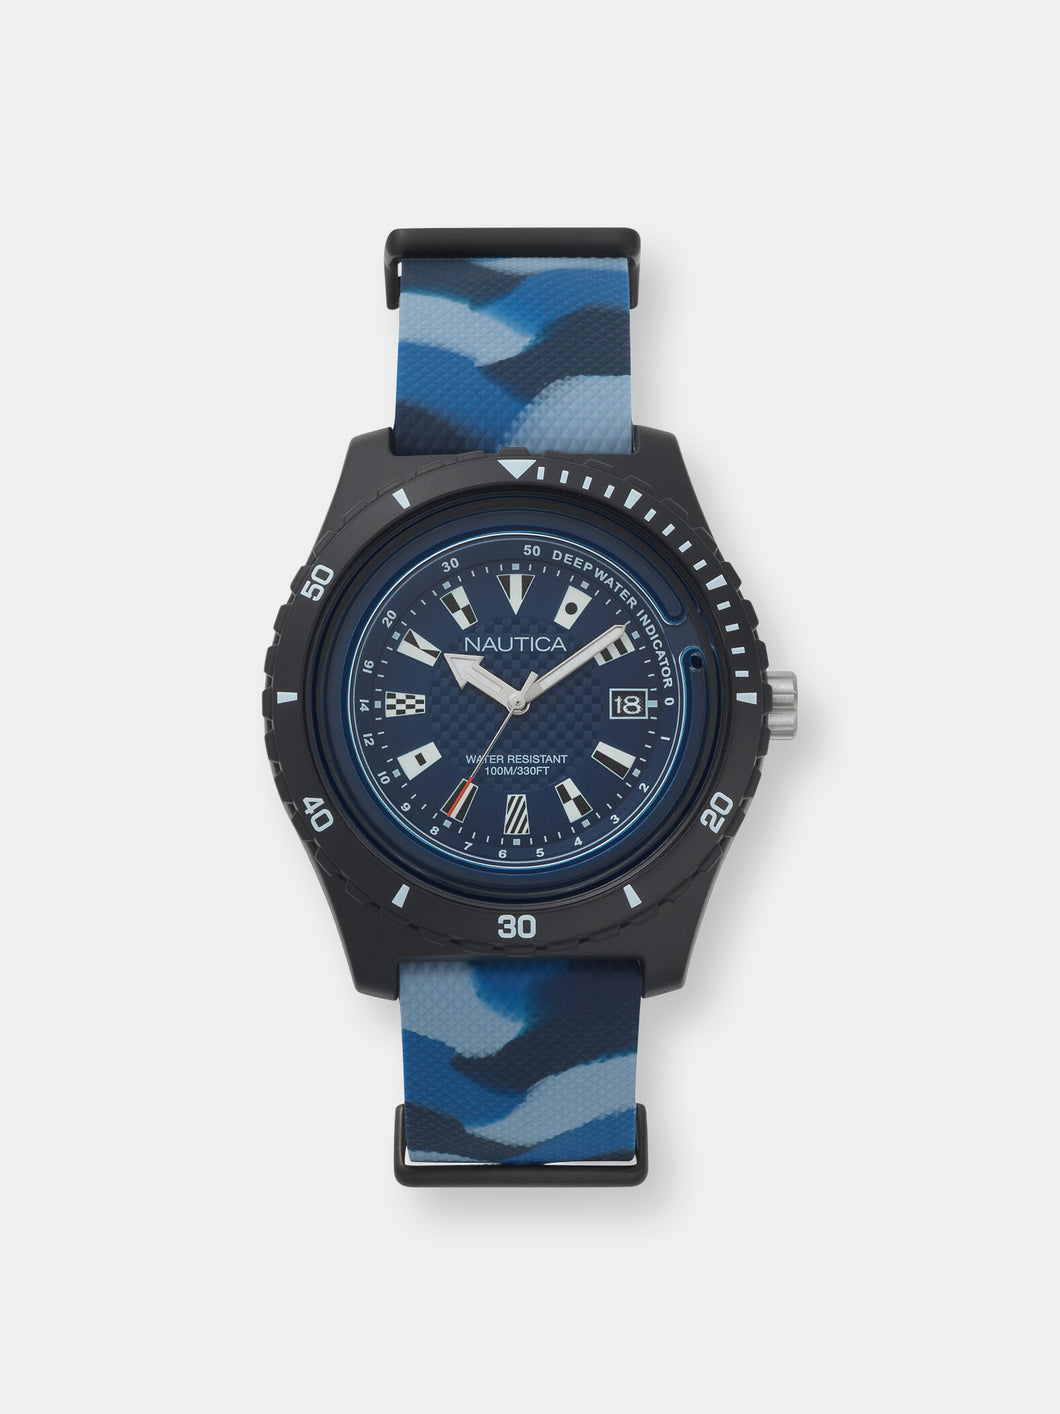 Nautica Watch NAPSRF004 Surfside, Analog, Water Resistant, Deep Water Indicator, Calendar, Signal Flag Indexes, Camo Silicone Strap, Blue